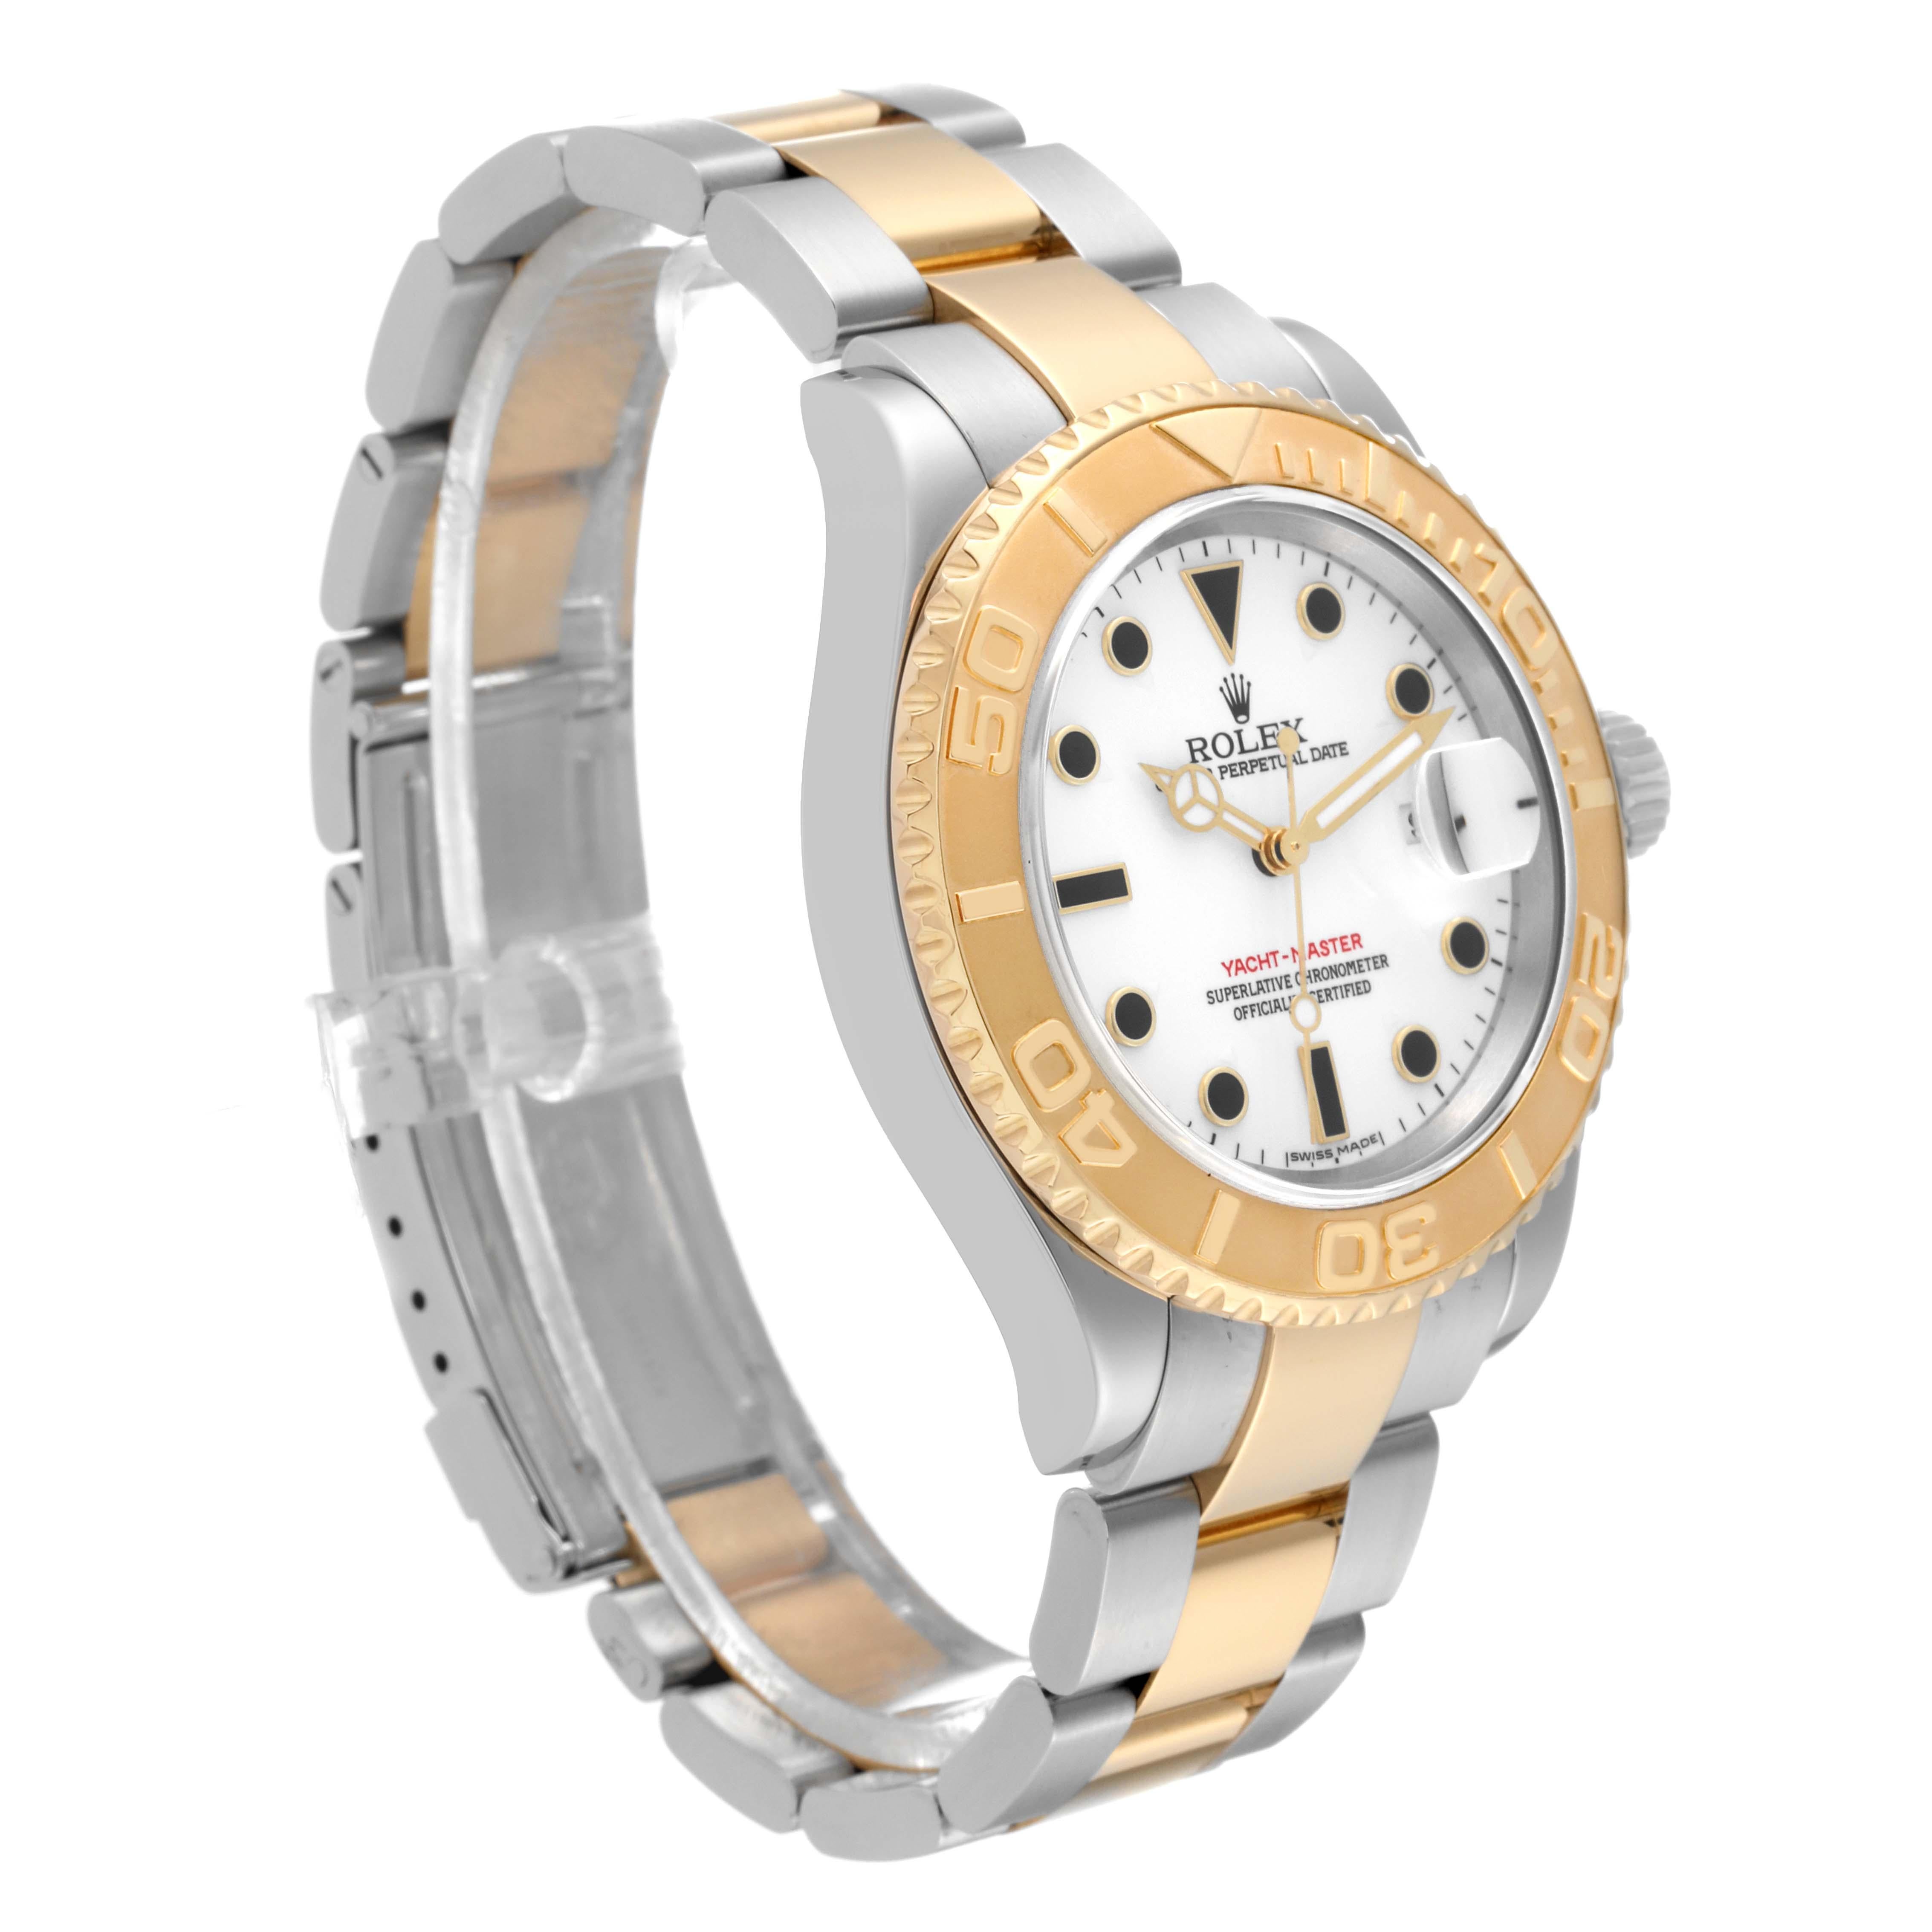 Rolex Yachtmaster Steel Yellow Gold White Dial Mens Watch 16623 Box Papers 4